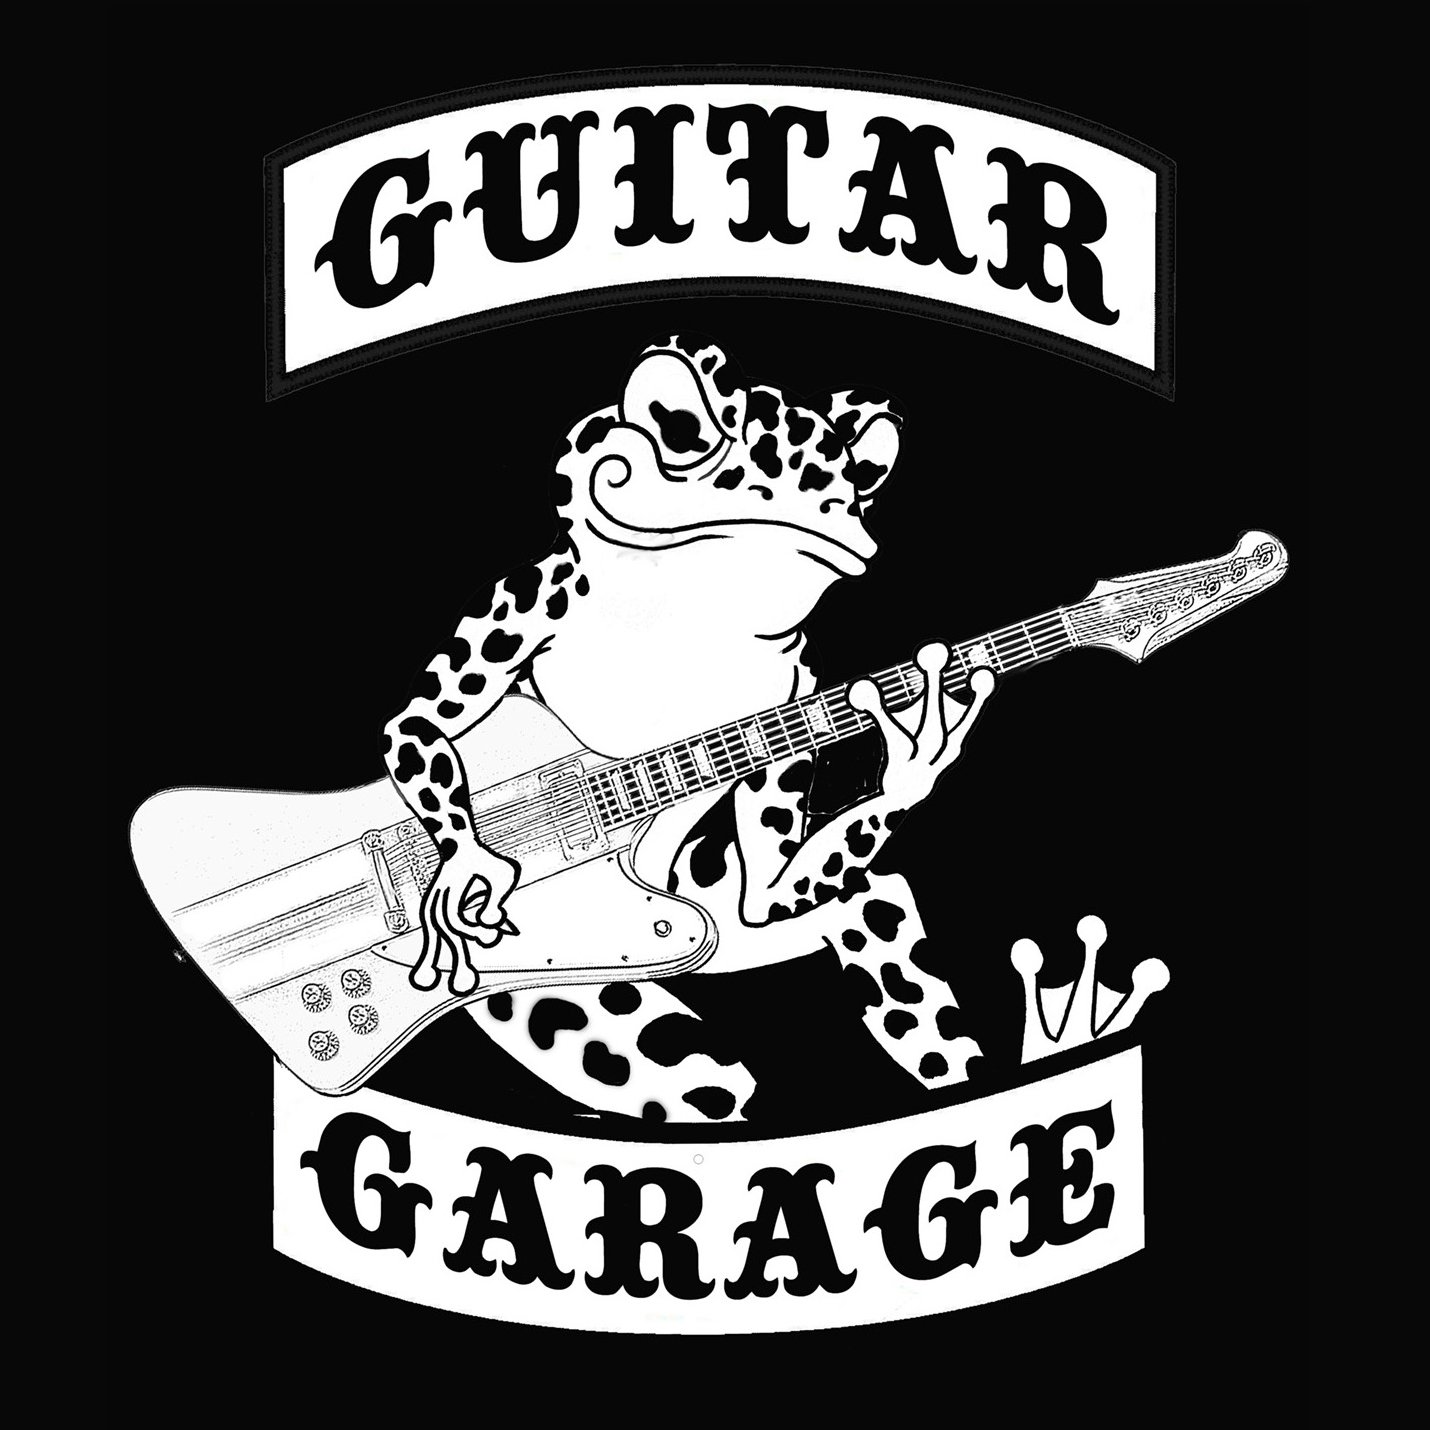 Guitar Garage is the first TV show to focus on the exciting world of guitar customization, modification, and collecting. First episode coming soon!